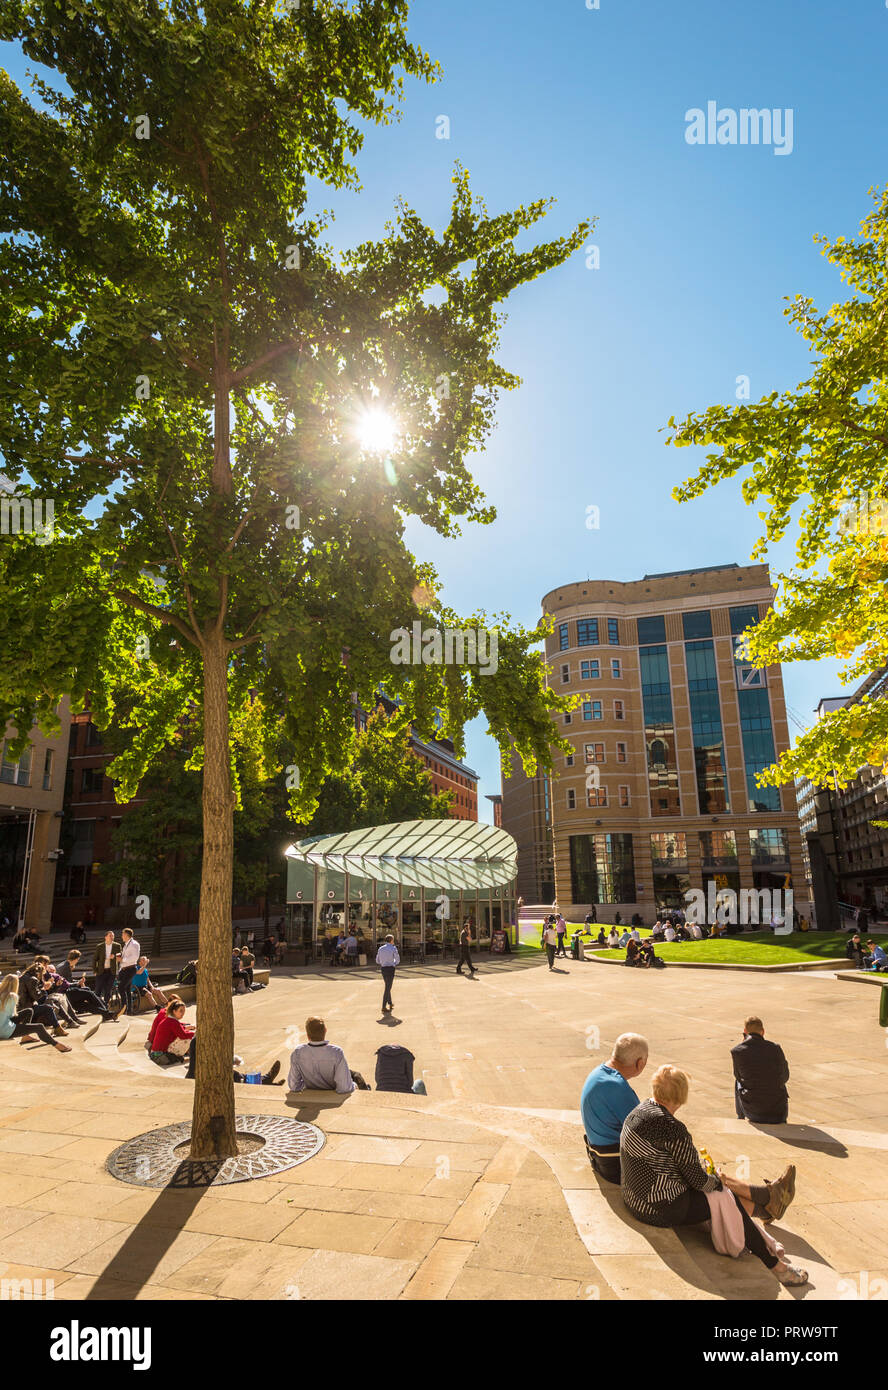 Central Square, Brindley Place, with people relaxing in late summer sunshine and warmth, Birmingham UK Stock Photo